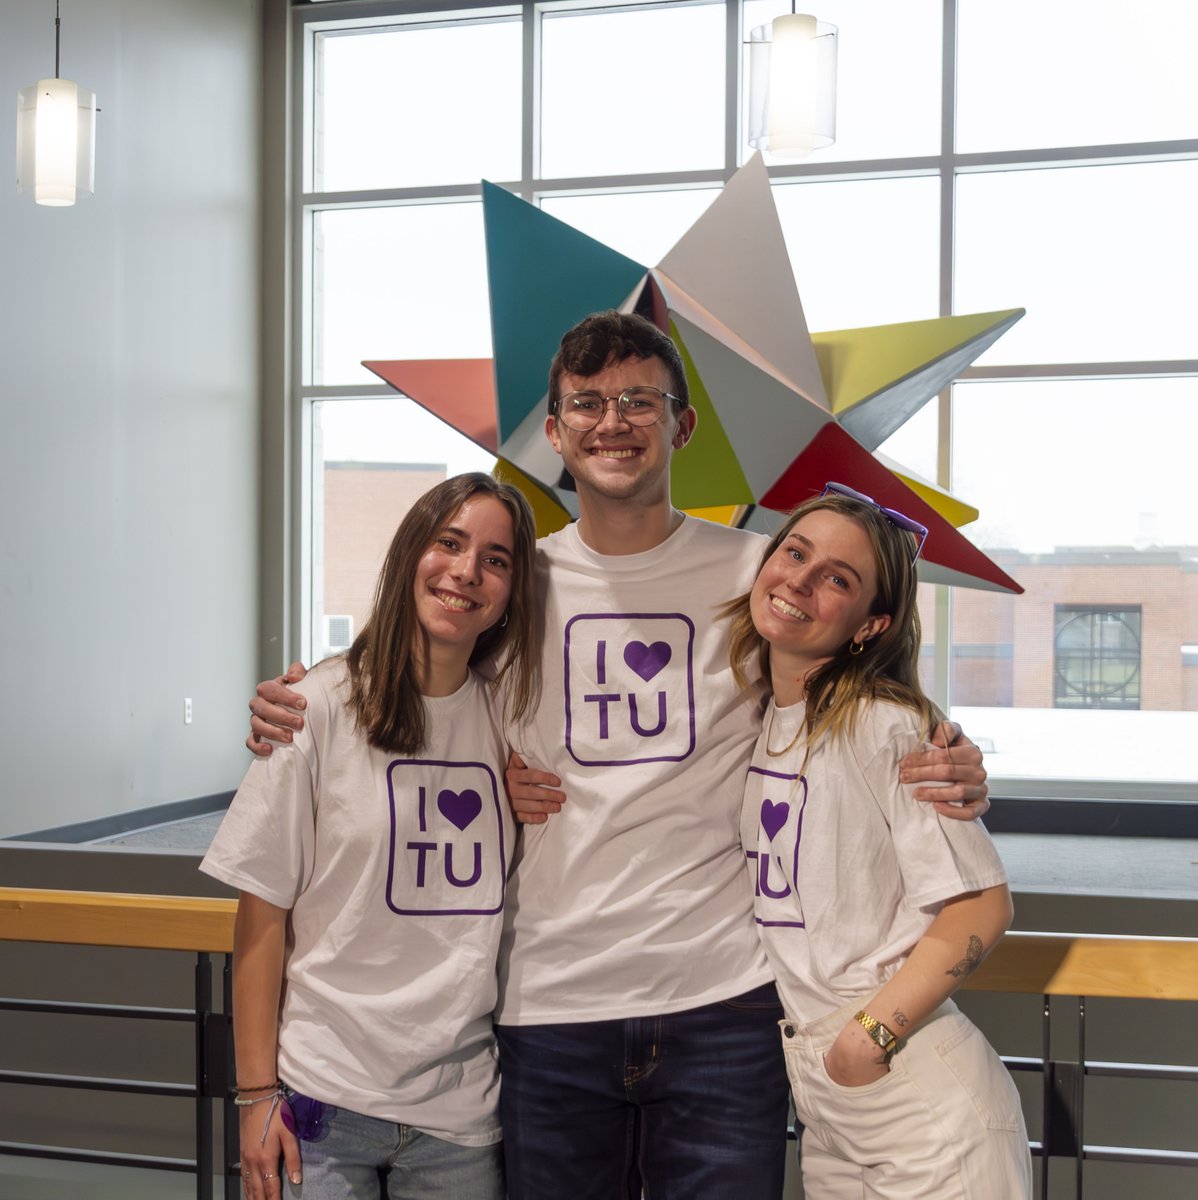 Show your love for Taylor and I💜TU Week all year round with an I💜TU T-Shirt! With a $75+ gift—which is still doubled!—we'll send you this year’s white and purple I💜TU shirt. Visit taylor.edu/ilovetu to make your gift now! #tayloruniversity #tayloru #ilovetu…